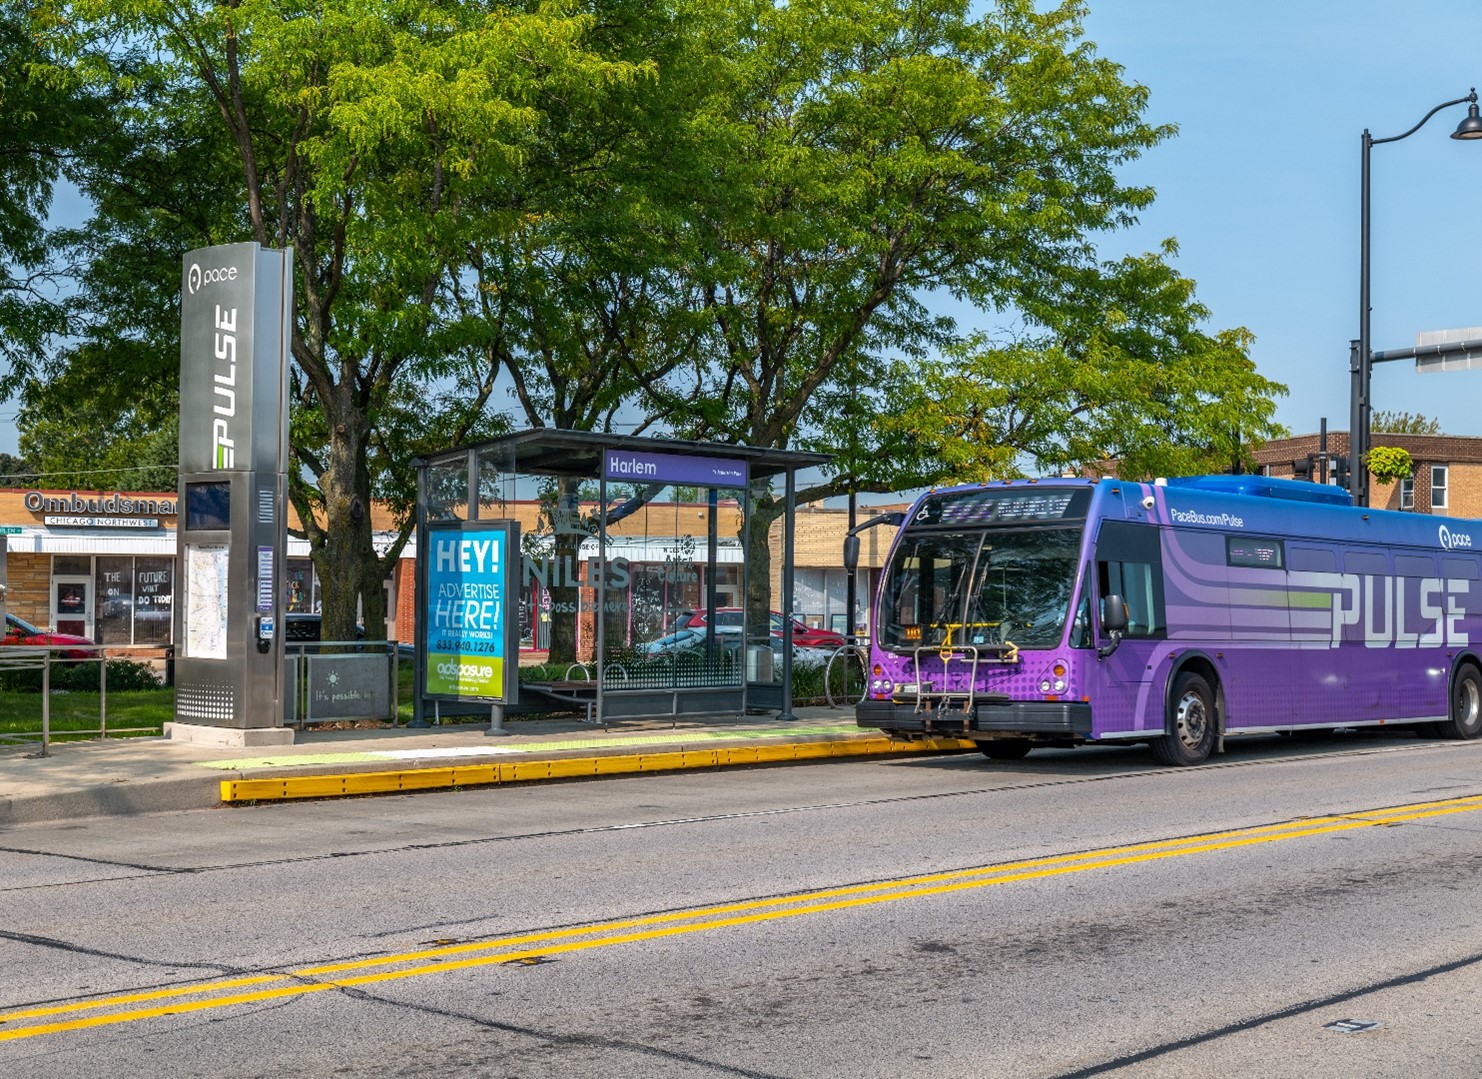 Image of a Pulse Bus on the west side of MIlwaukee Ave. just south of Harlem Ave. in Niles